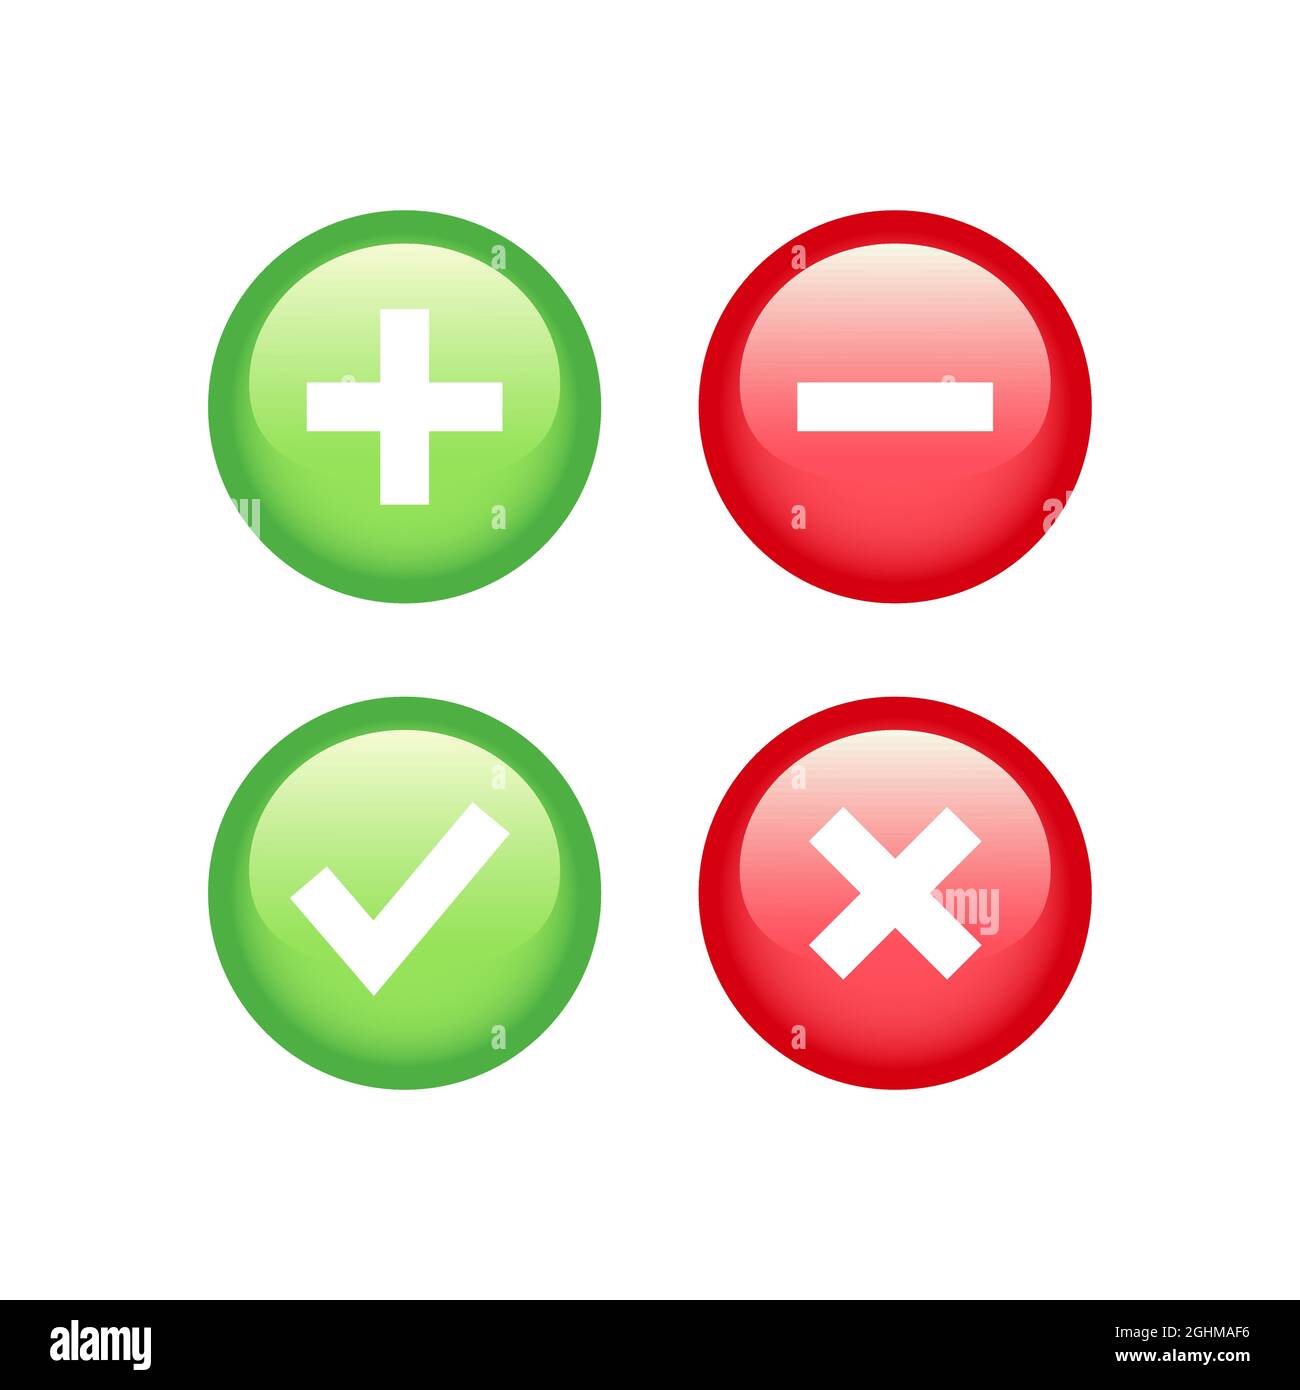 Check, tick, plus and minus sign button. Red and green checkmark and cross glossy icon set. Stock Vector